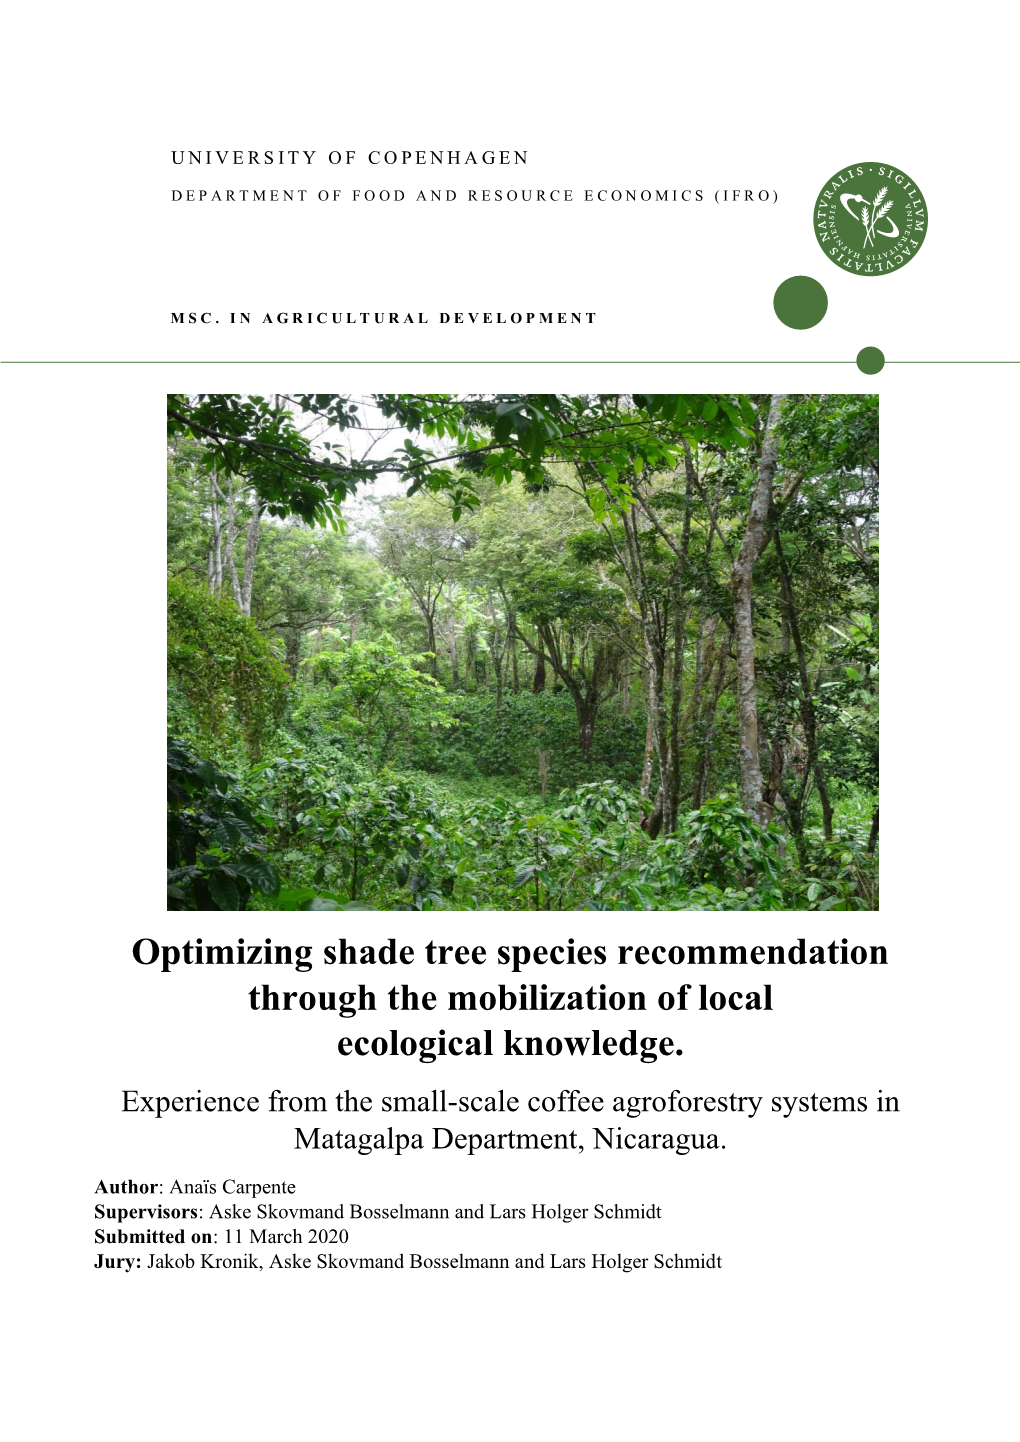 Optimizing Shade Tree Species Recommendation Through the Mobilization of Local Ecological Knowledge